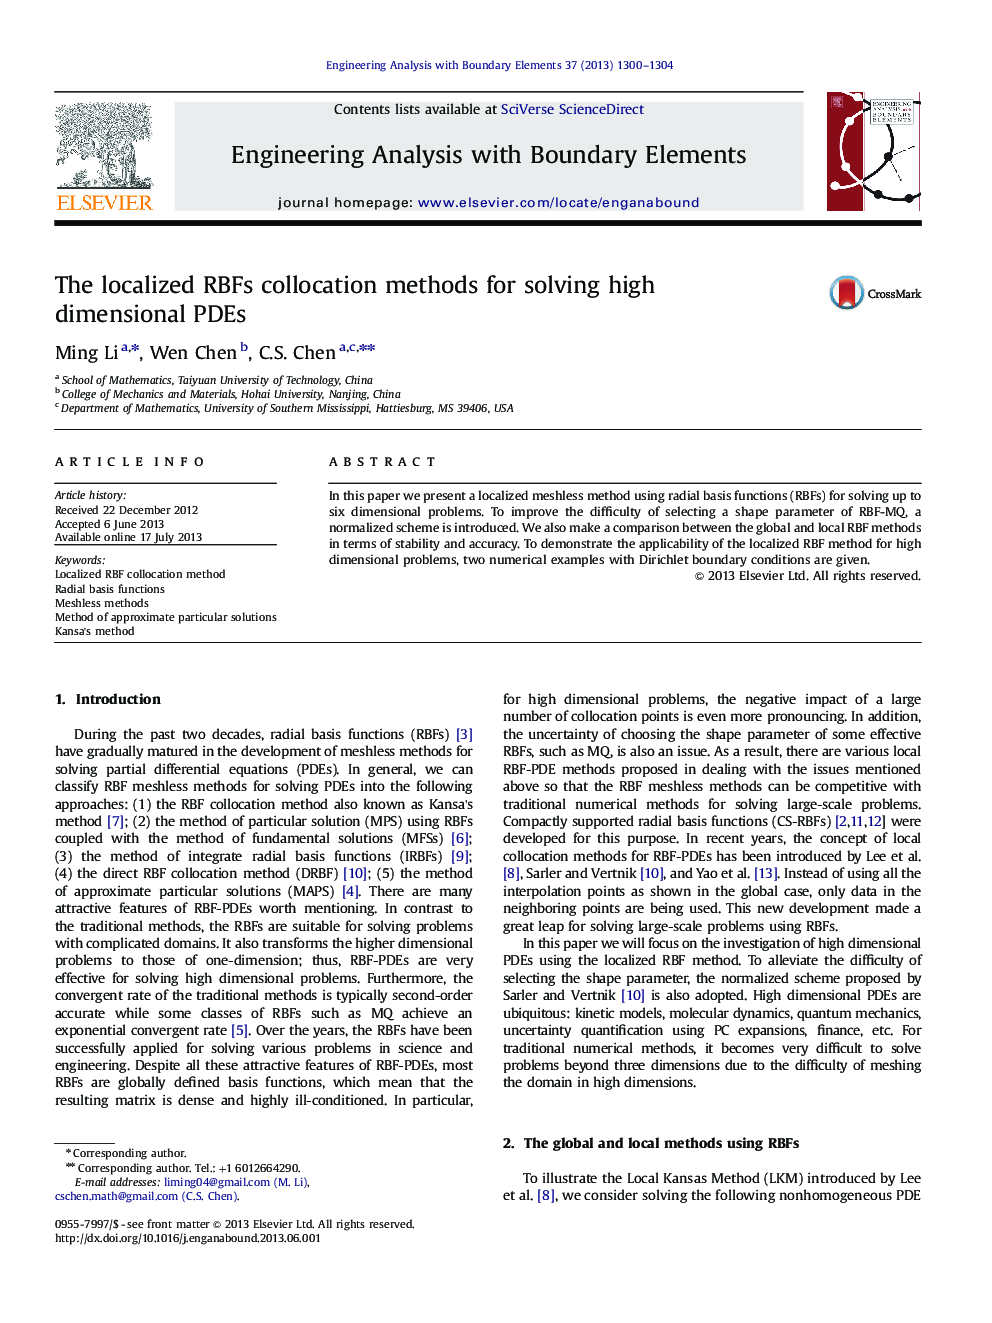 The localized RBFs collocation methods for solving high dimensional PDEs